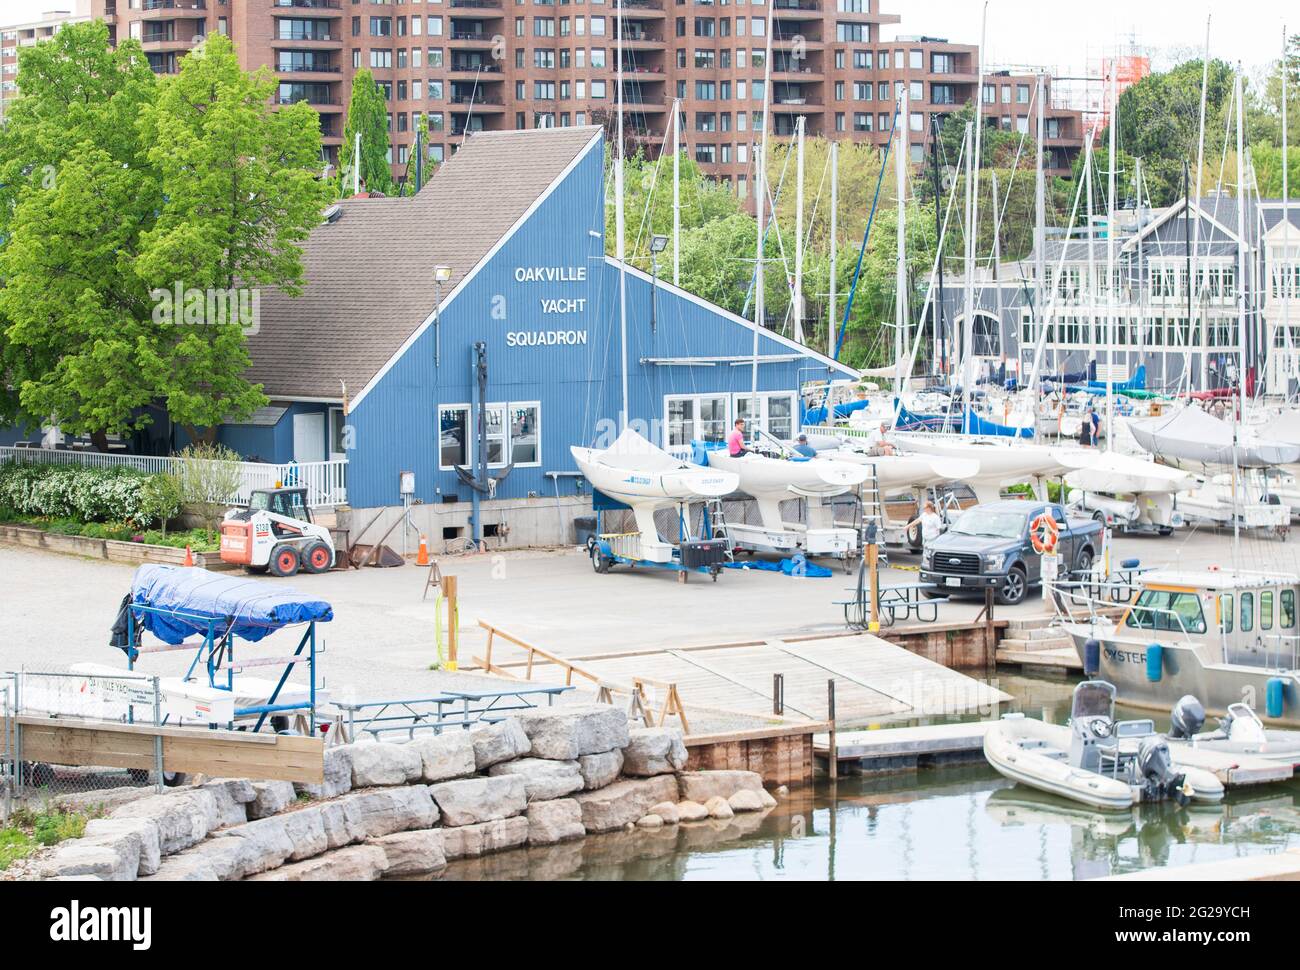 Oakville Yacht Squadron building along with various boats in the yard. Stock Photo